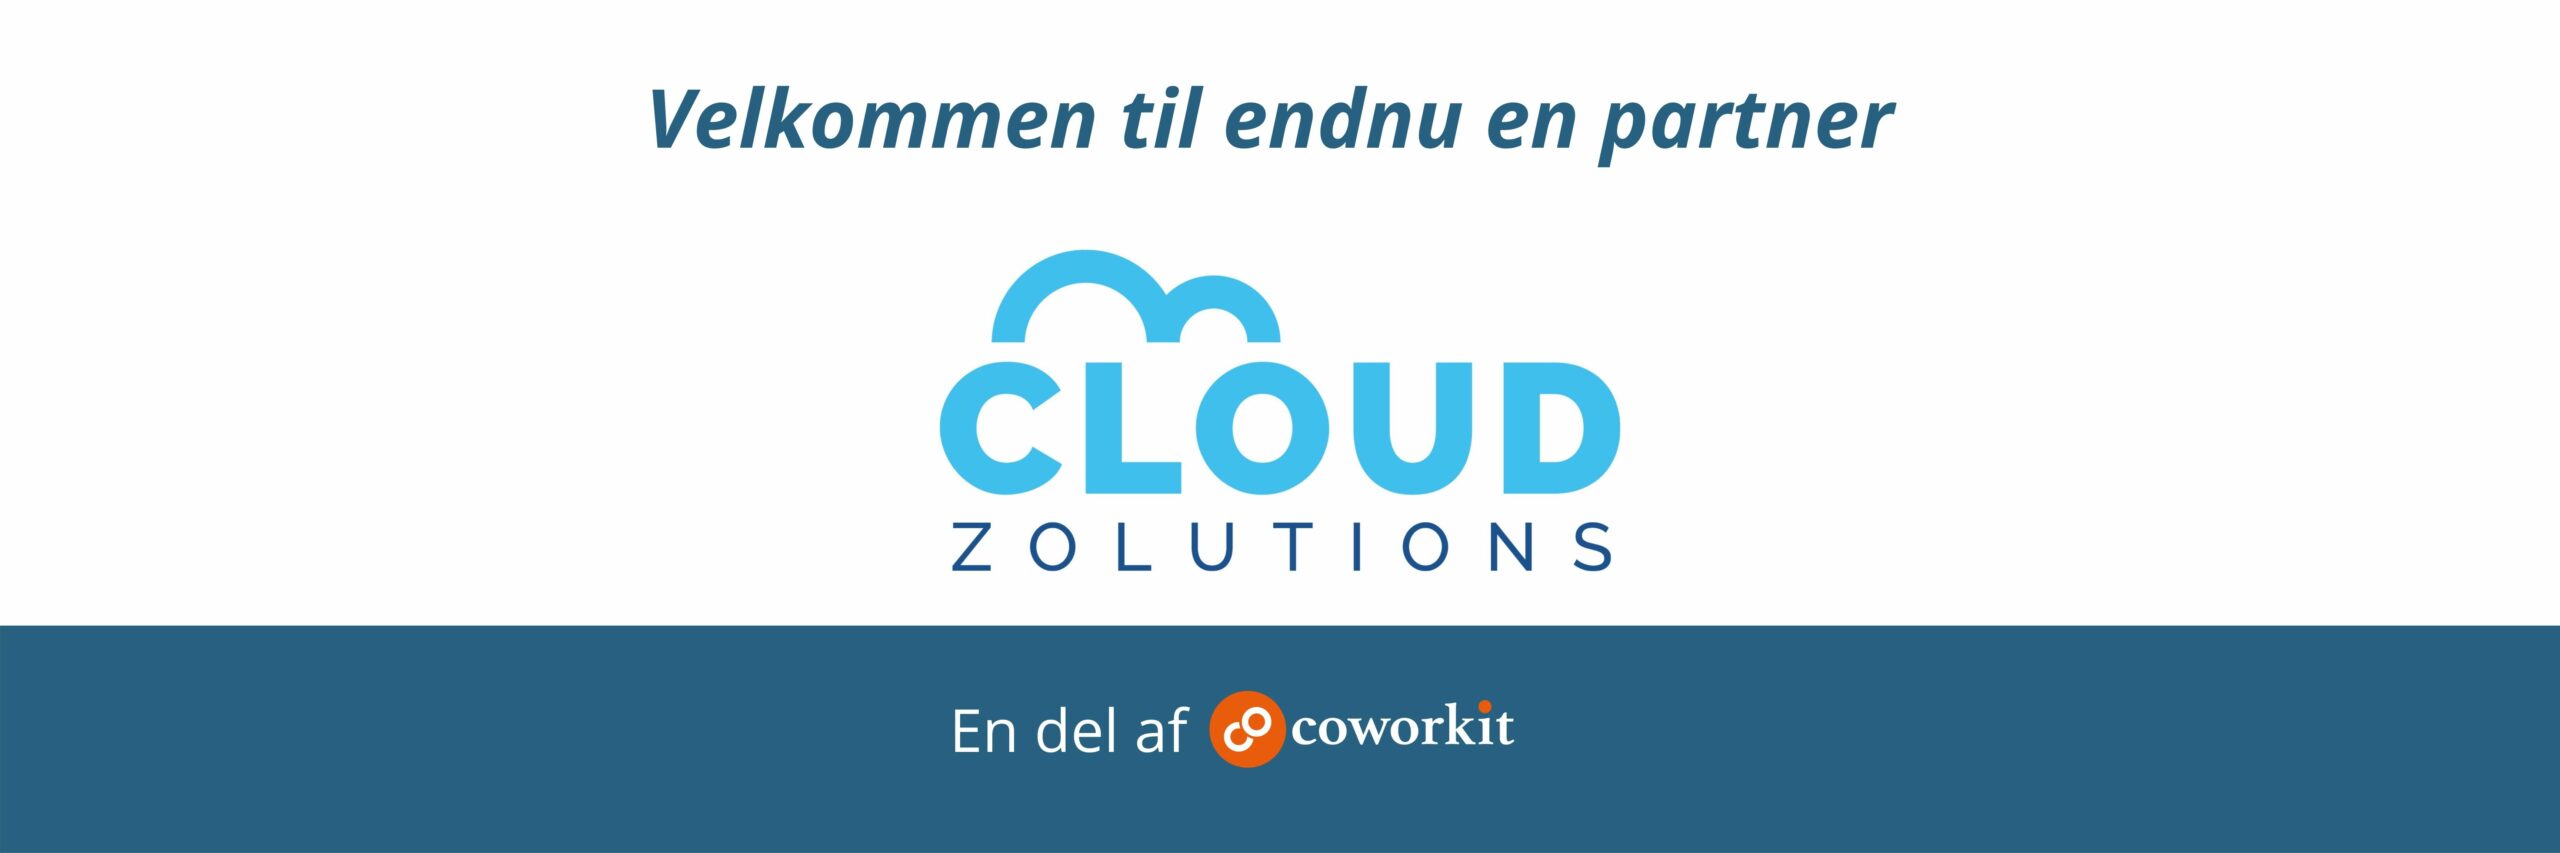 Ny partner i CoworkIt – Cloud Zolutions